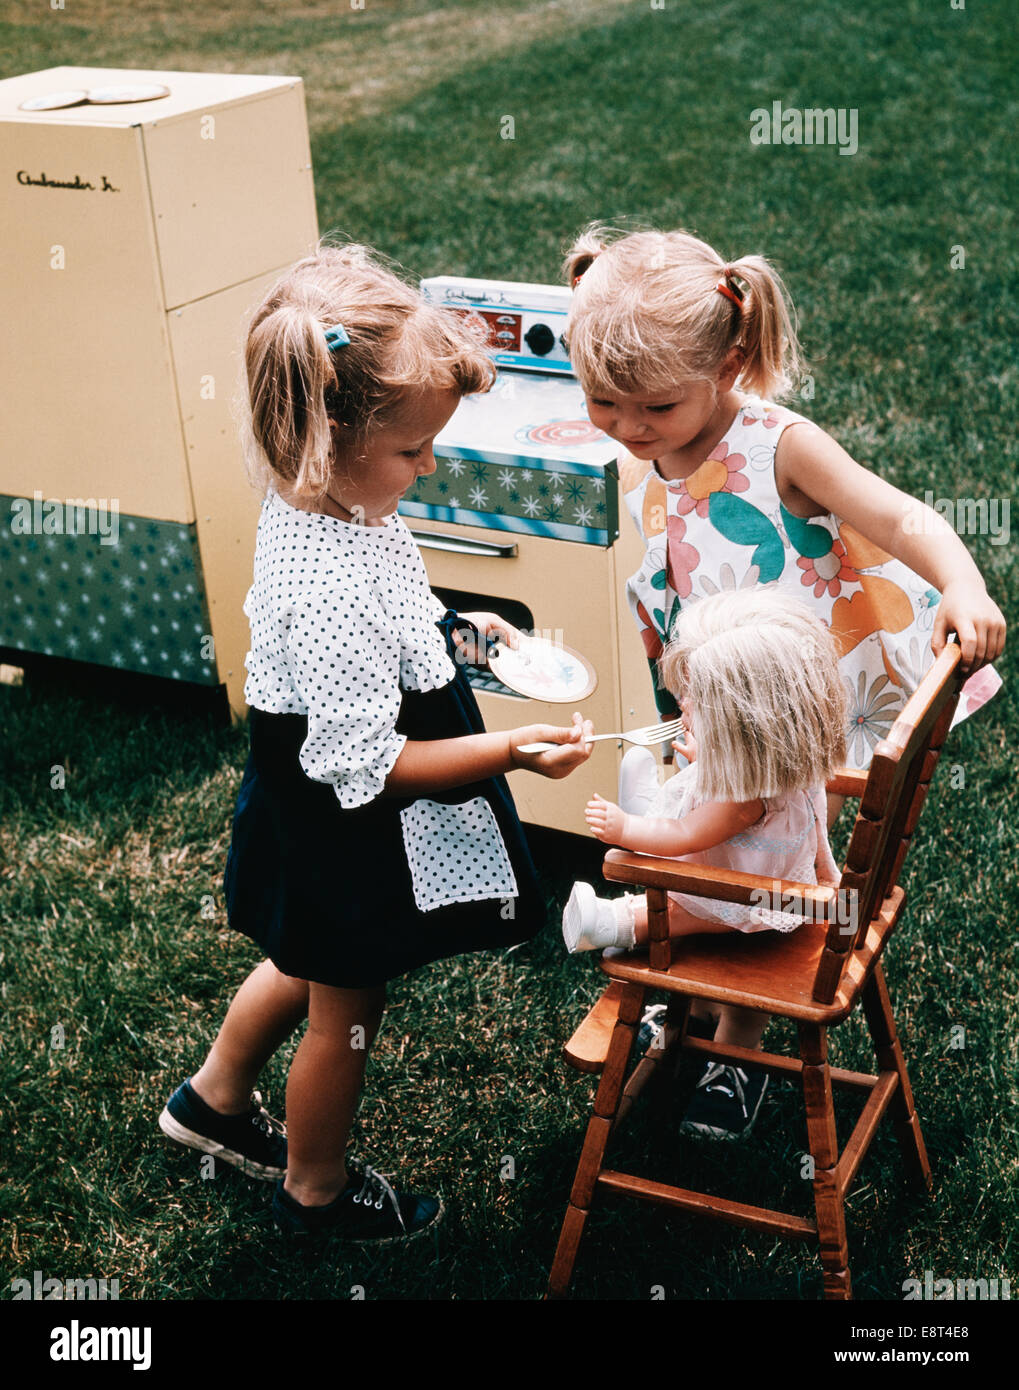 1960s TWO LITTLE GIRLS PLAYING TOGETHER FEEDING DOLL TOY STOVE REFRIGERATOR IN BACKYARD Stock Photo